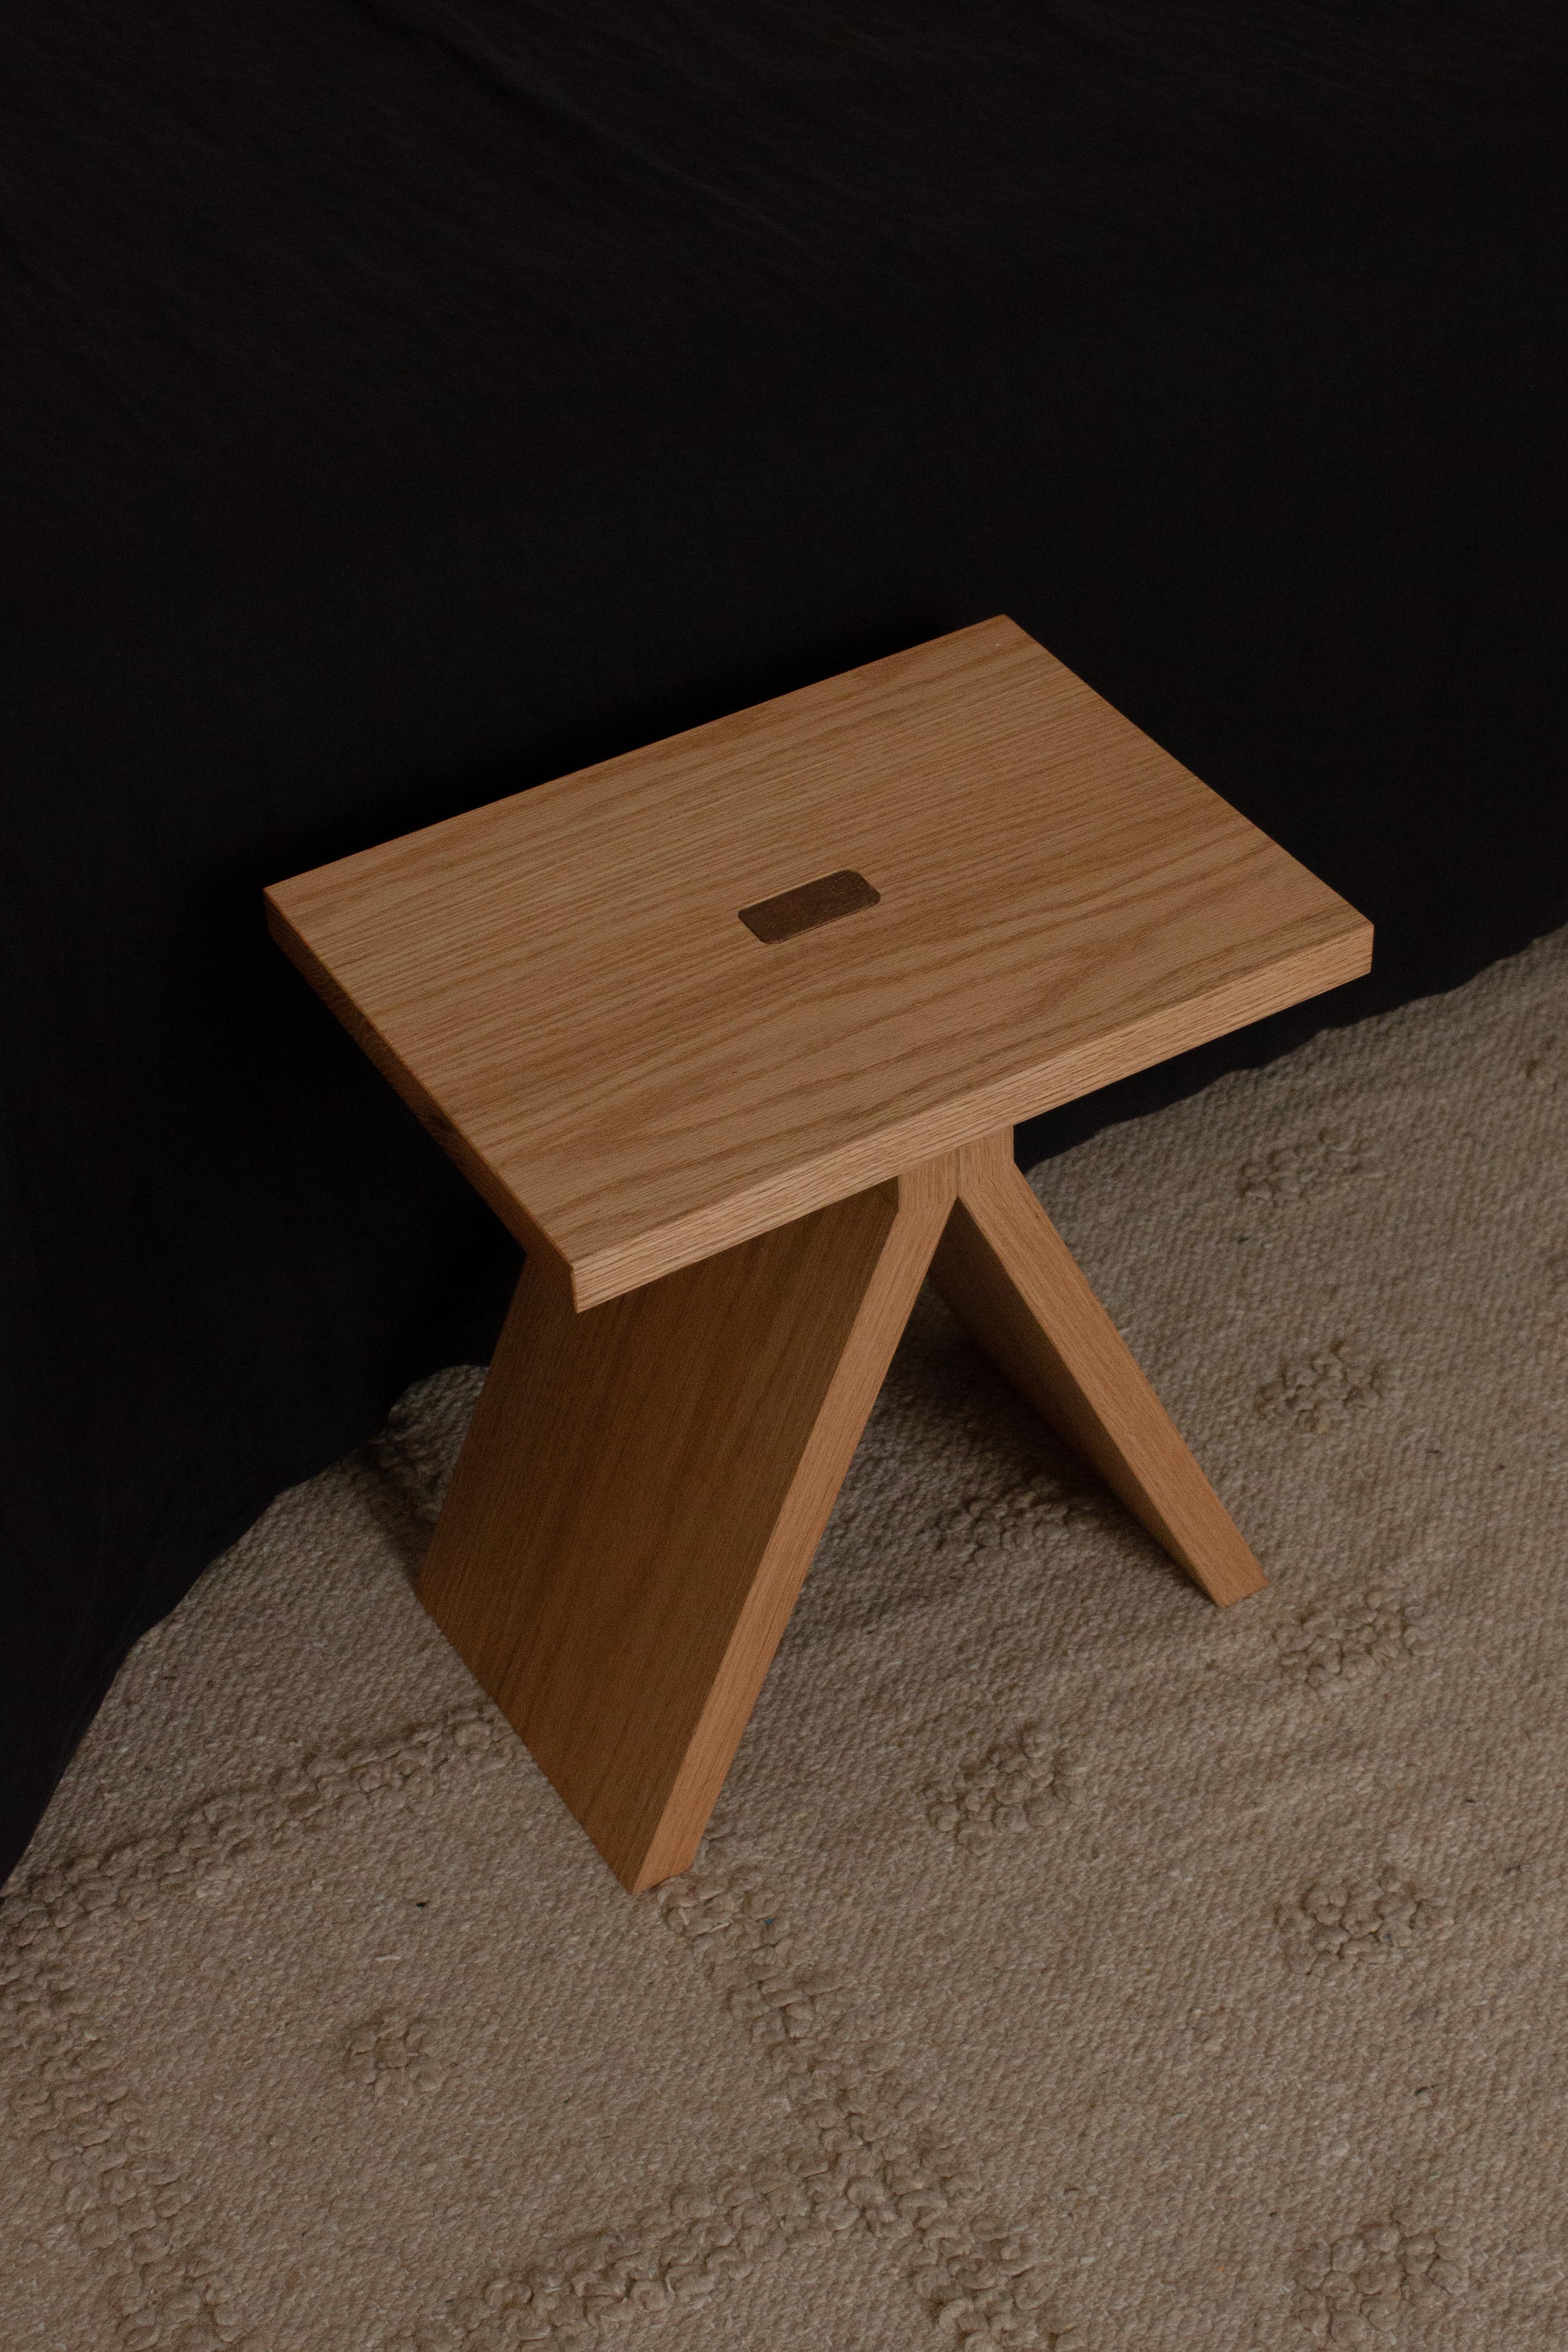 Mexican Minimal Wooden Stool 